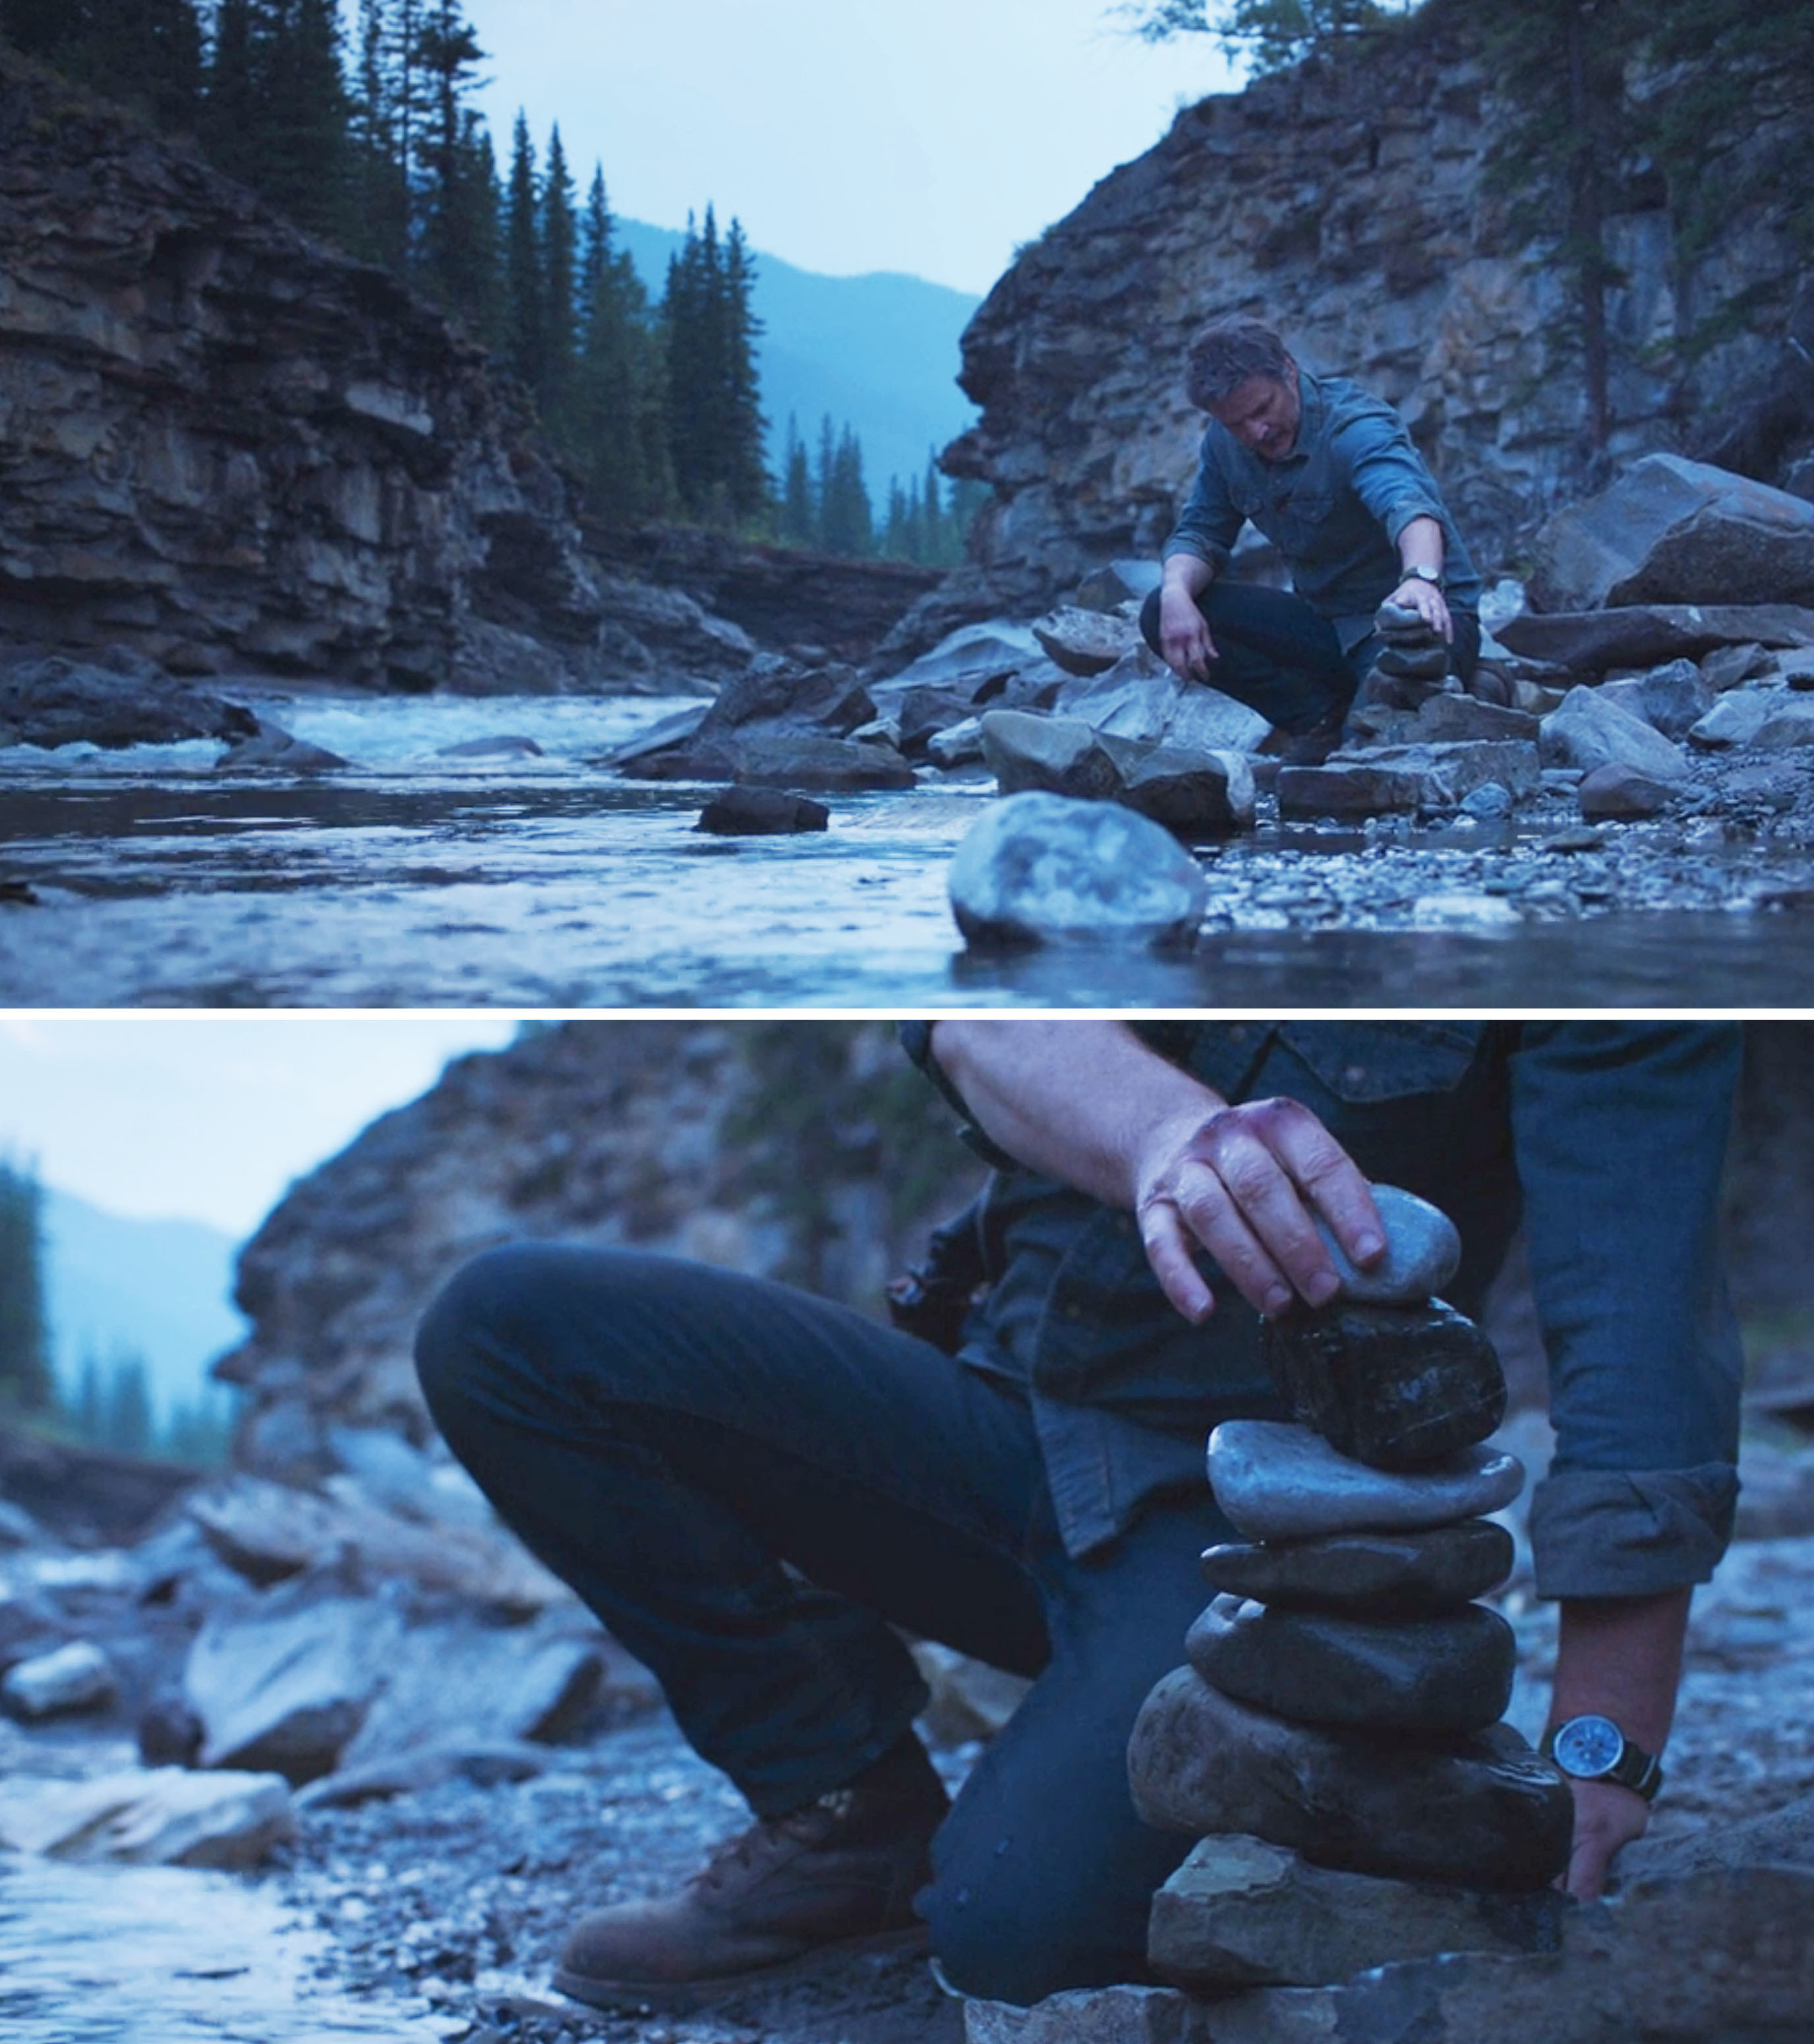 Joel stacking rocks on the bank of a river